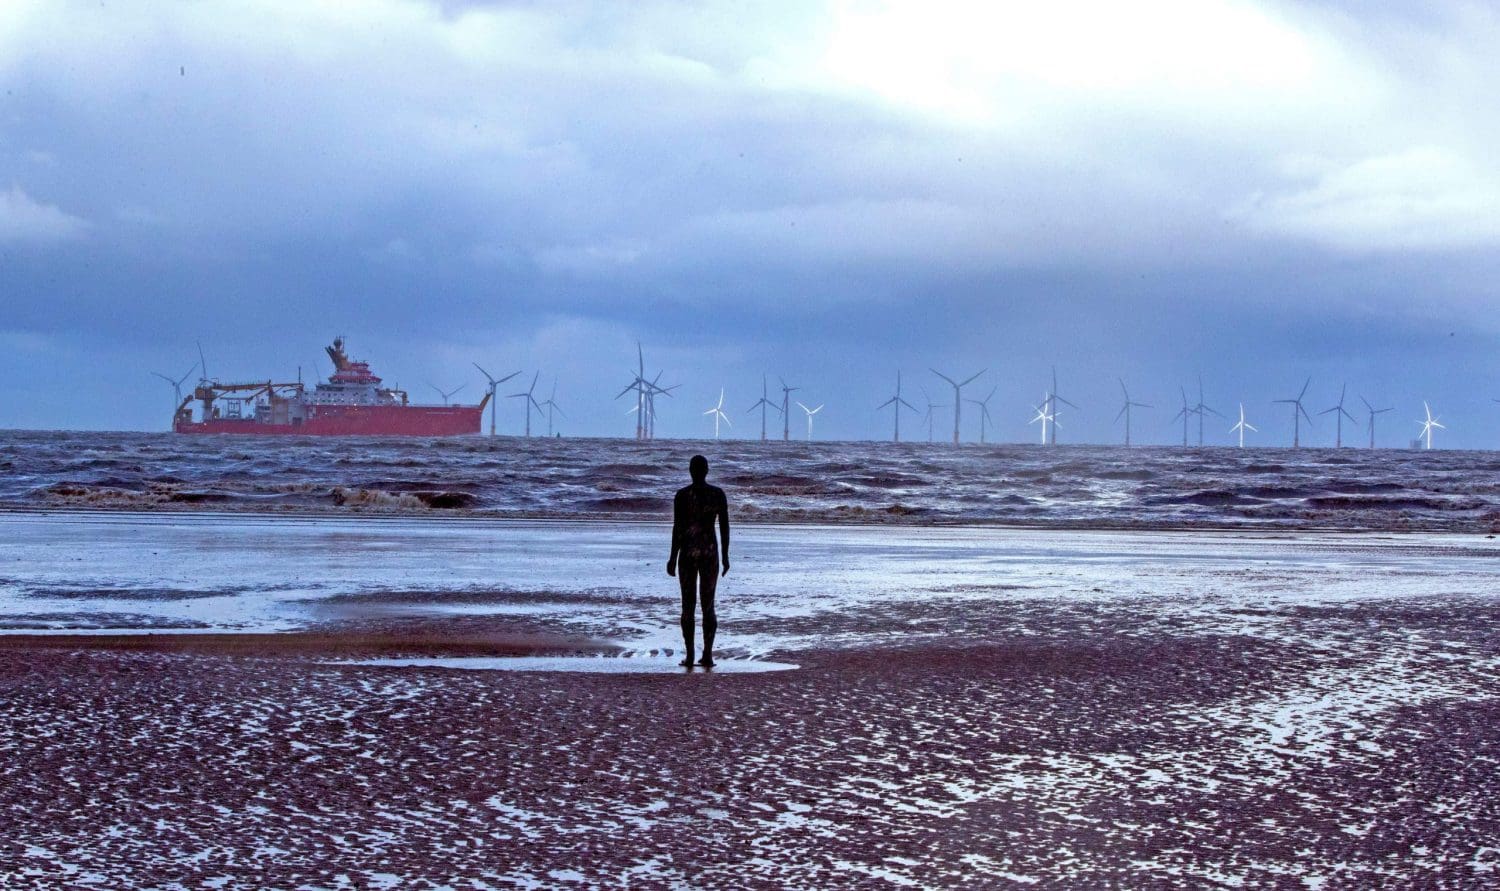 Statue of a man staring out at an offshore windfarm